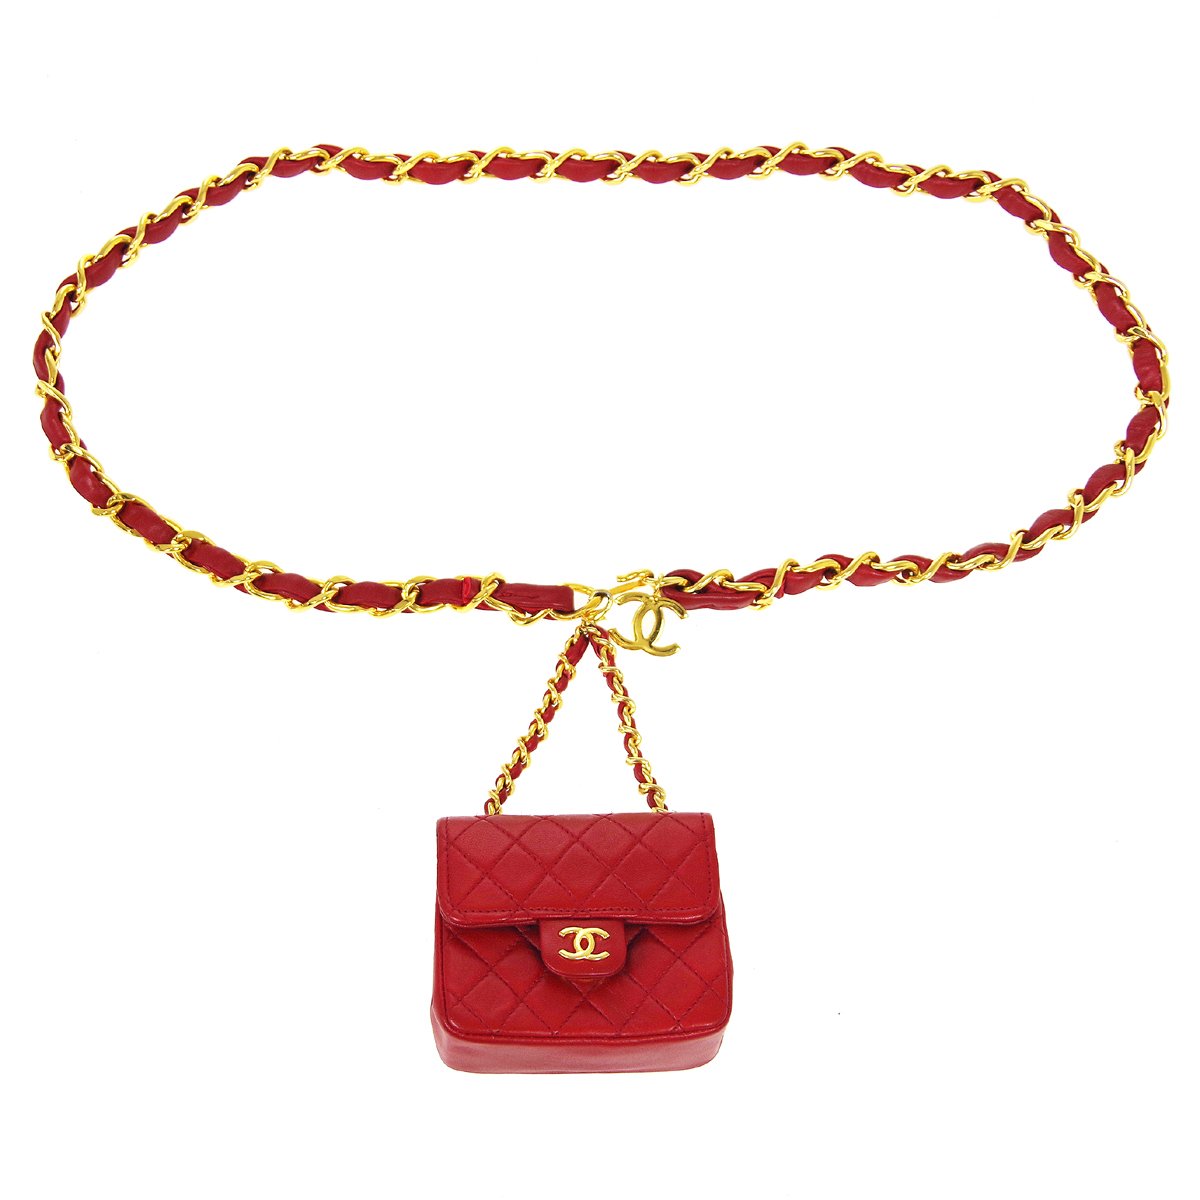 CHANEL, Bags, Chanel Red Belt Bag With Vintage Chain Bow Belt